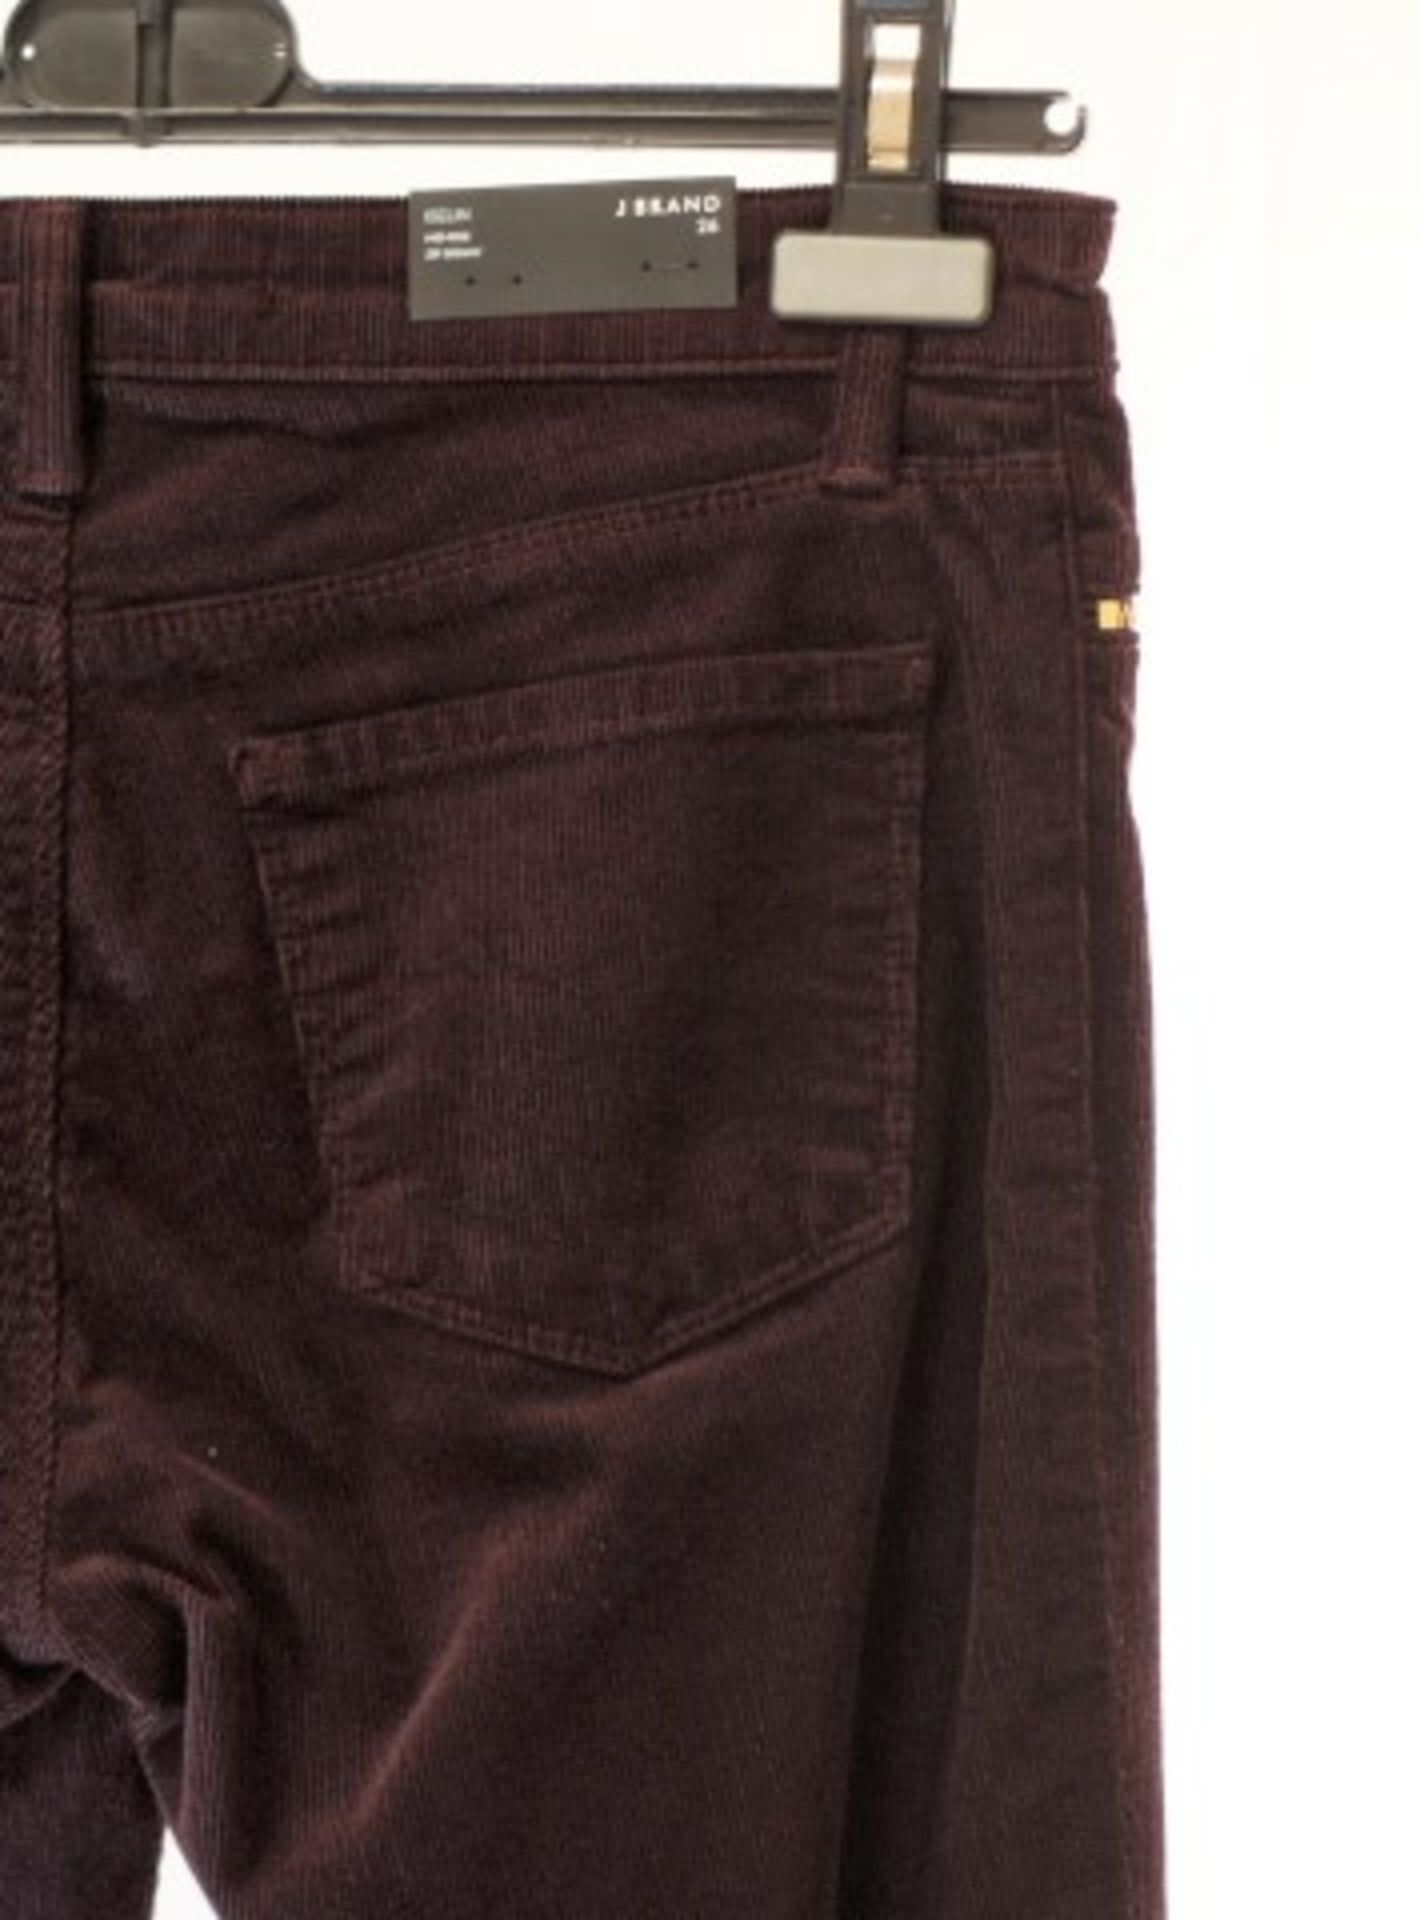 1 x J Brand Blackberry Corduroy Jeans - Size: 6 to 8 - Material: 56% Cotton, 37% Modal, 6% - Image 6 of 6